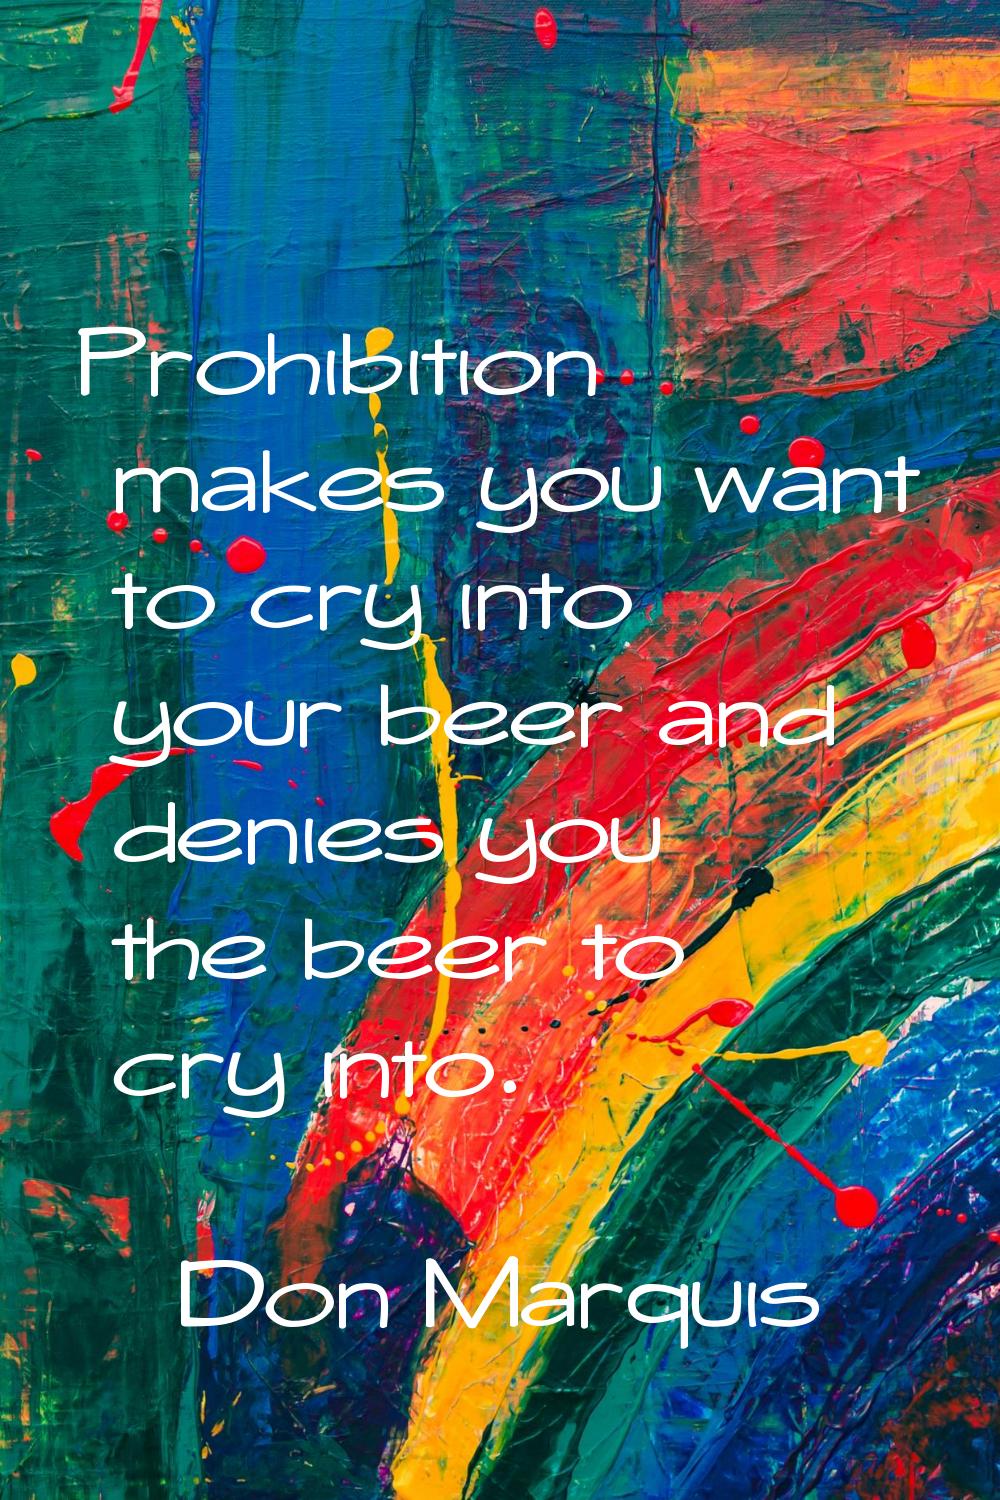 Prohibition makes you want to cry into your beer and denies you the beer to cry into.